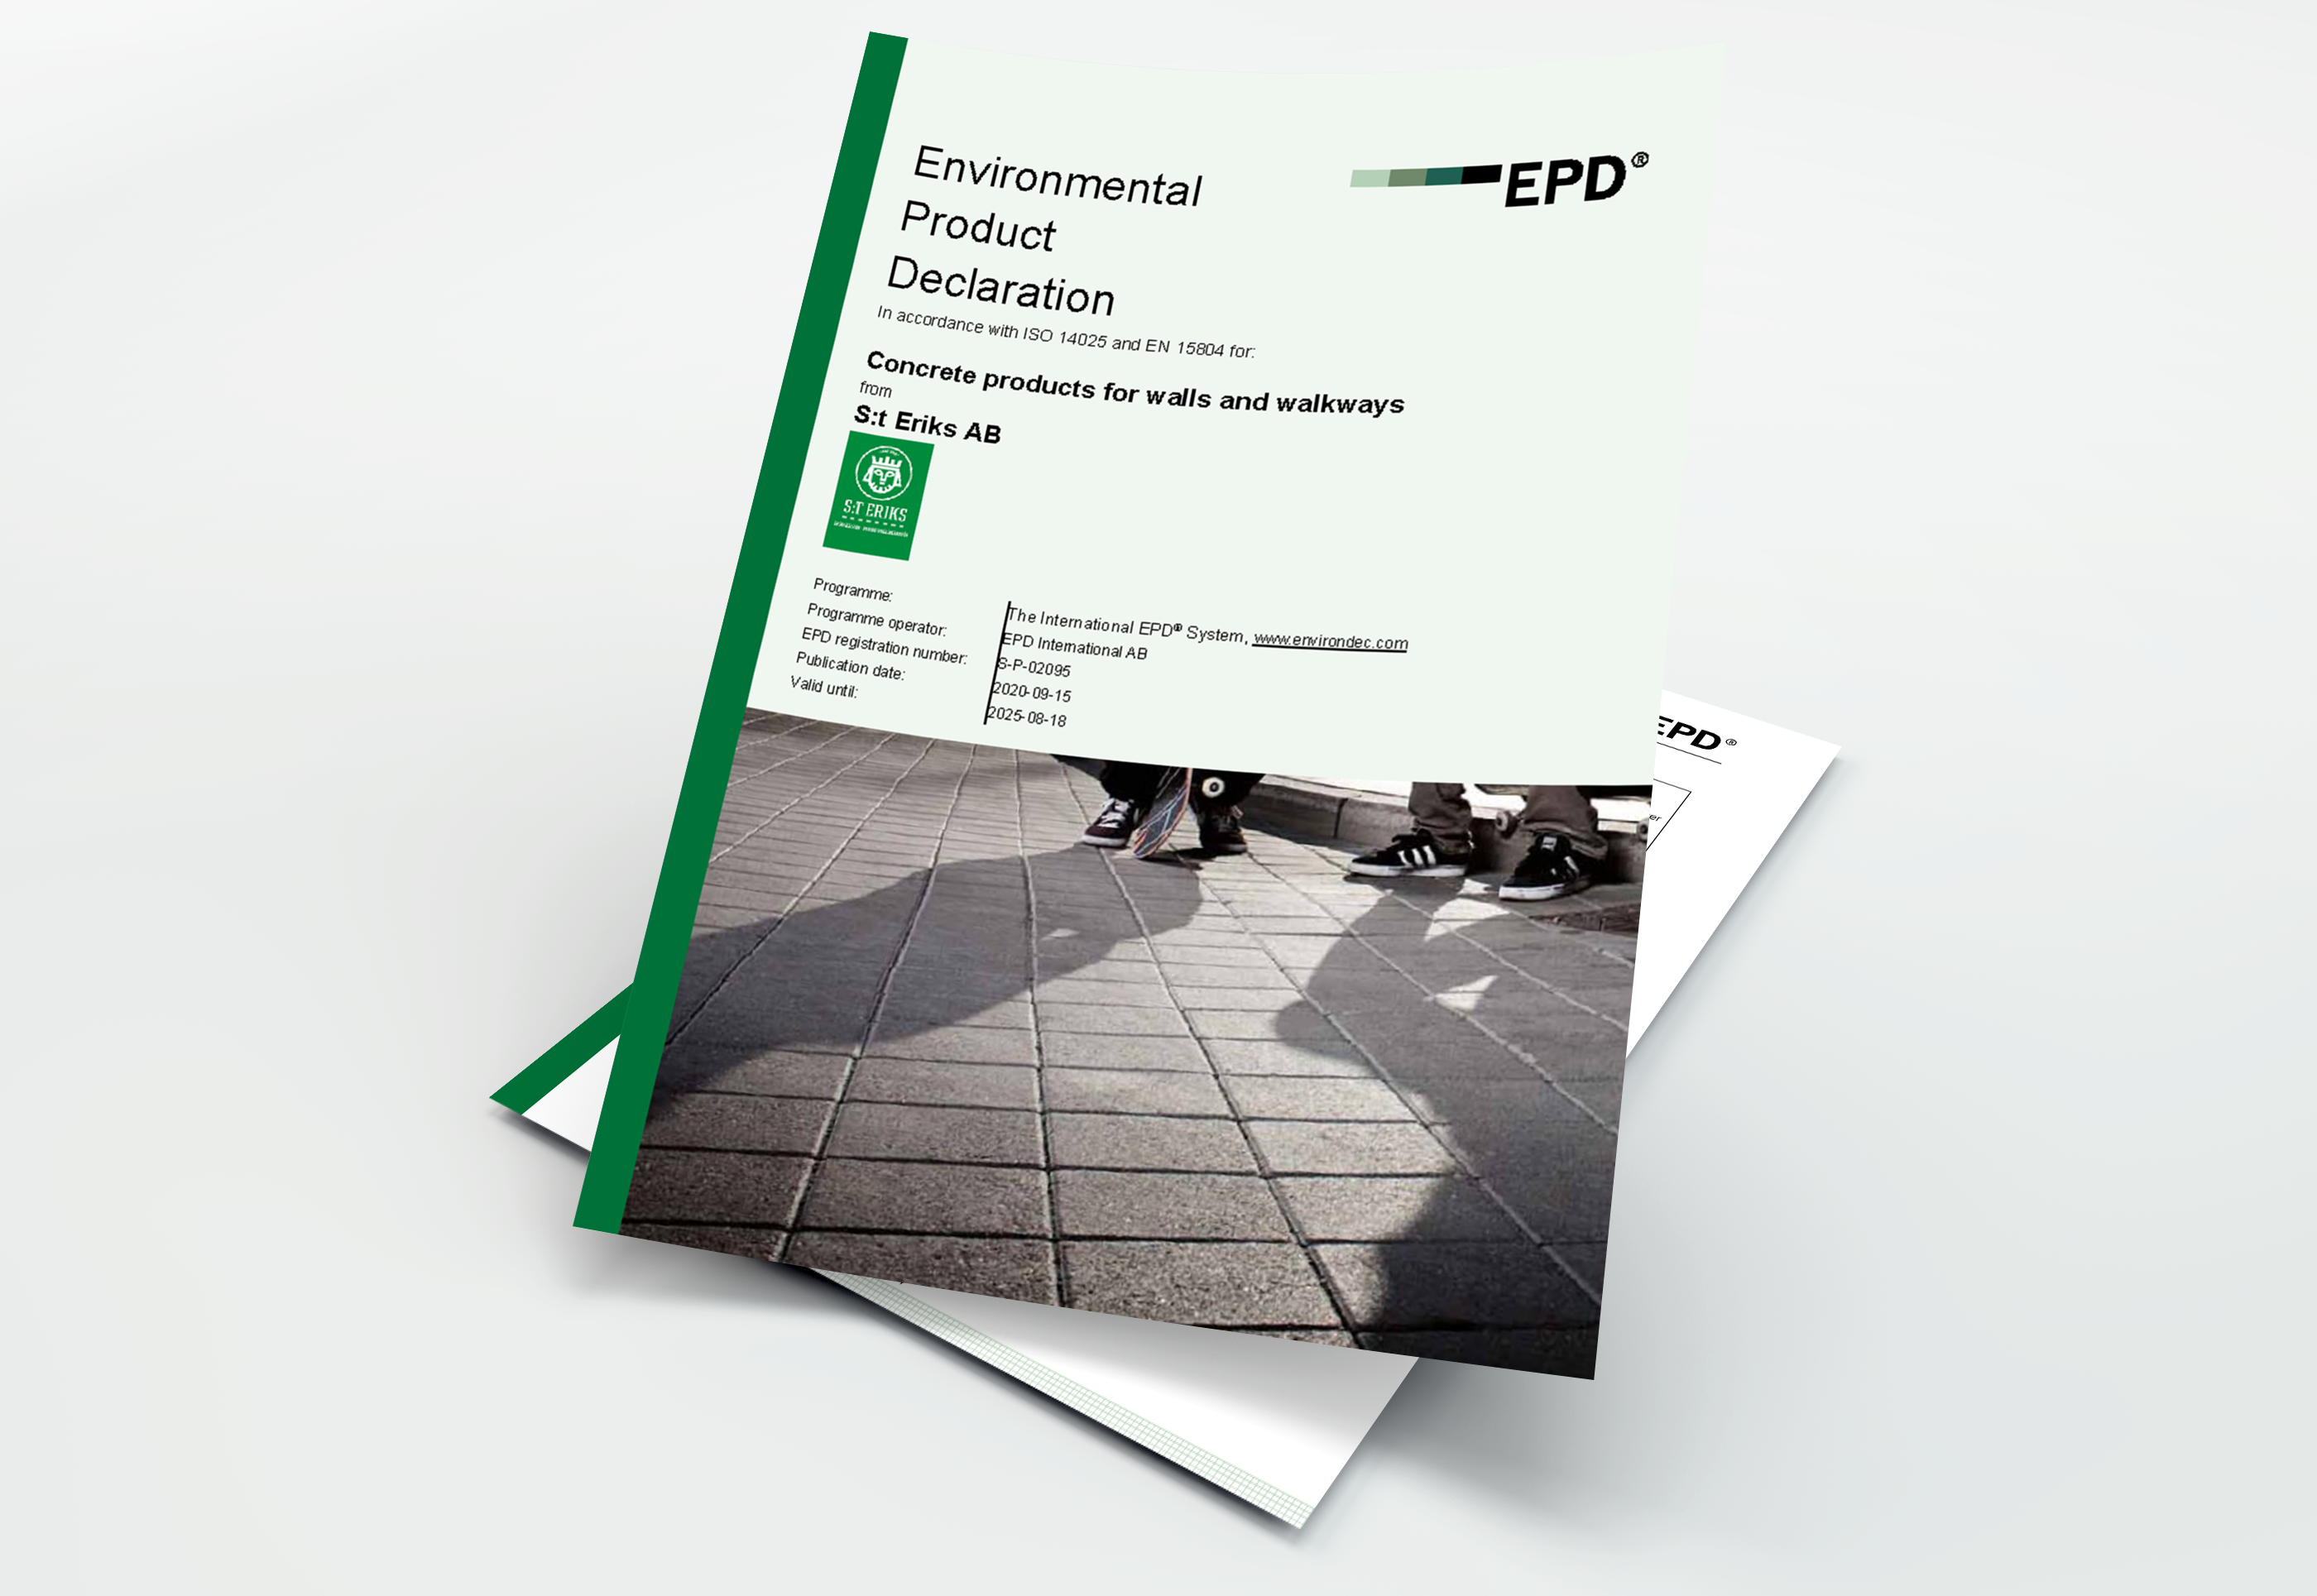 EPD Concrete products for walls and walkways